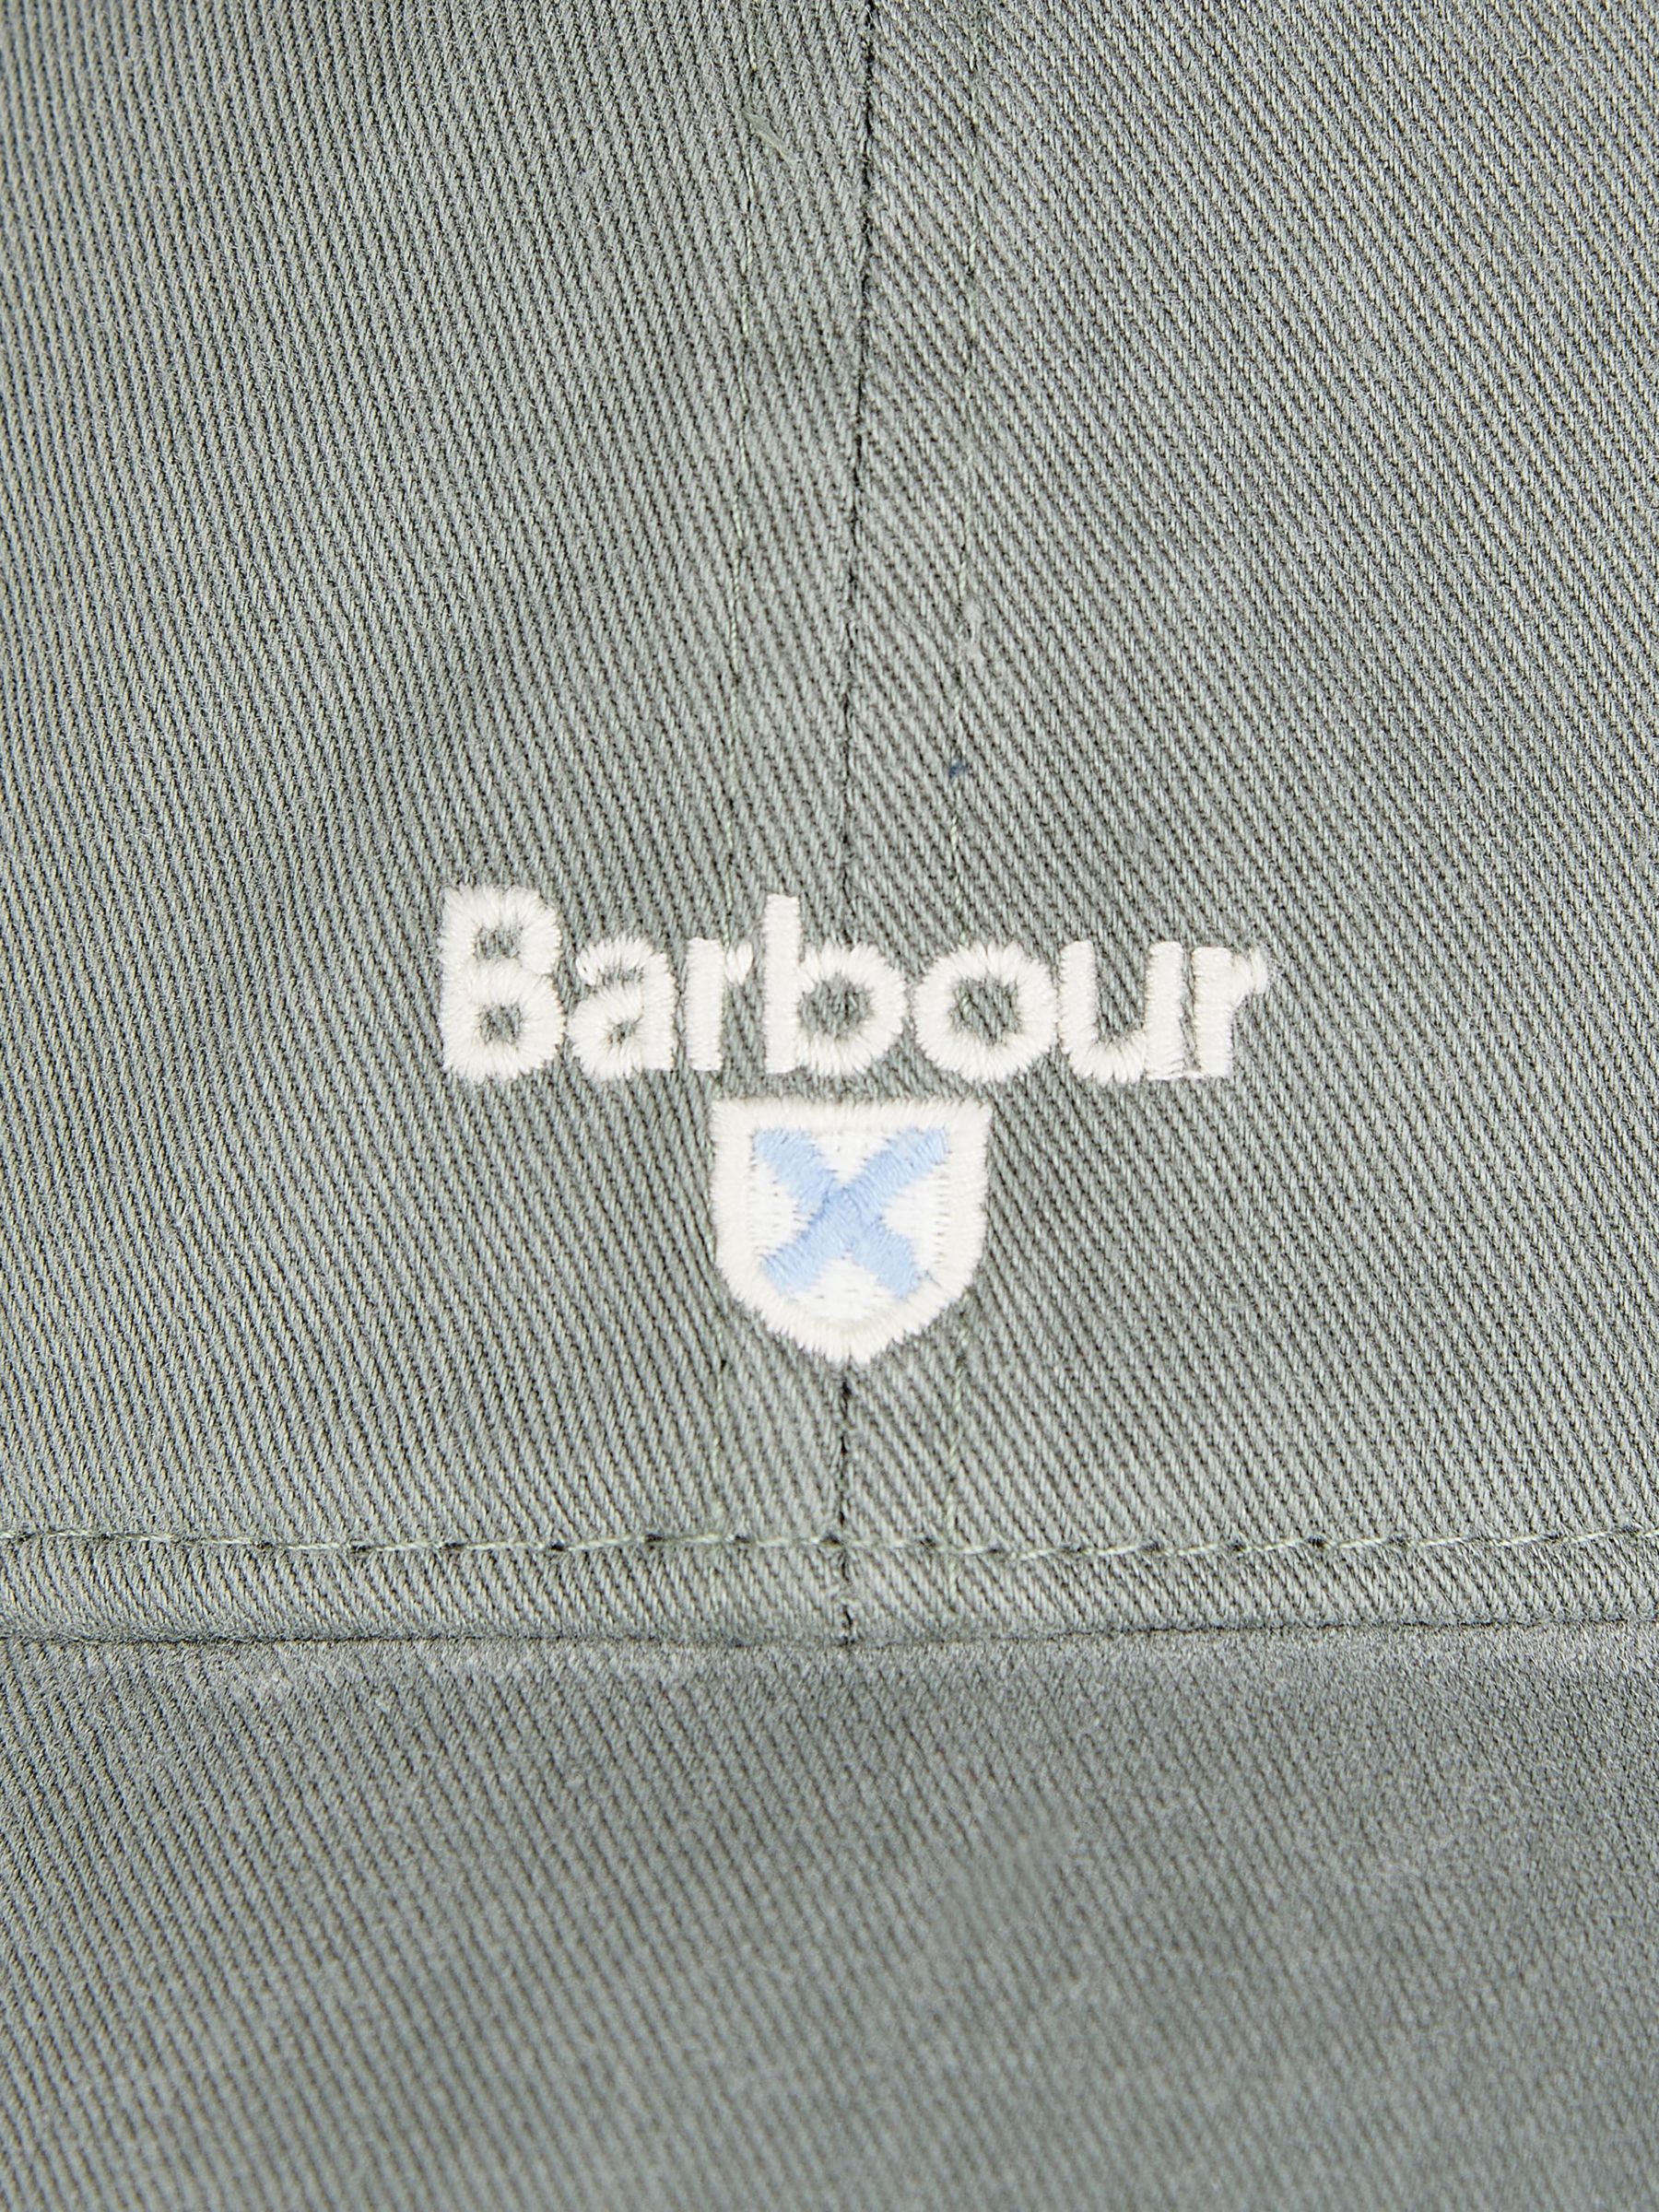 Buy Barbour Cascade Sports Cap, Agave Green Online at johnlewis.com